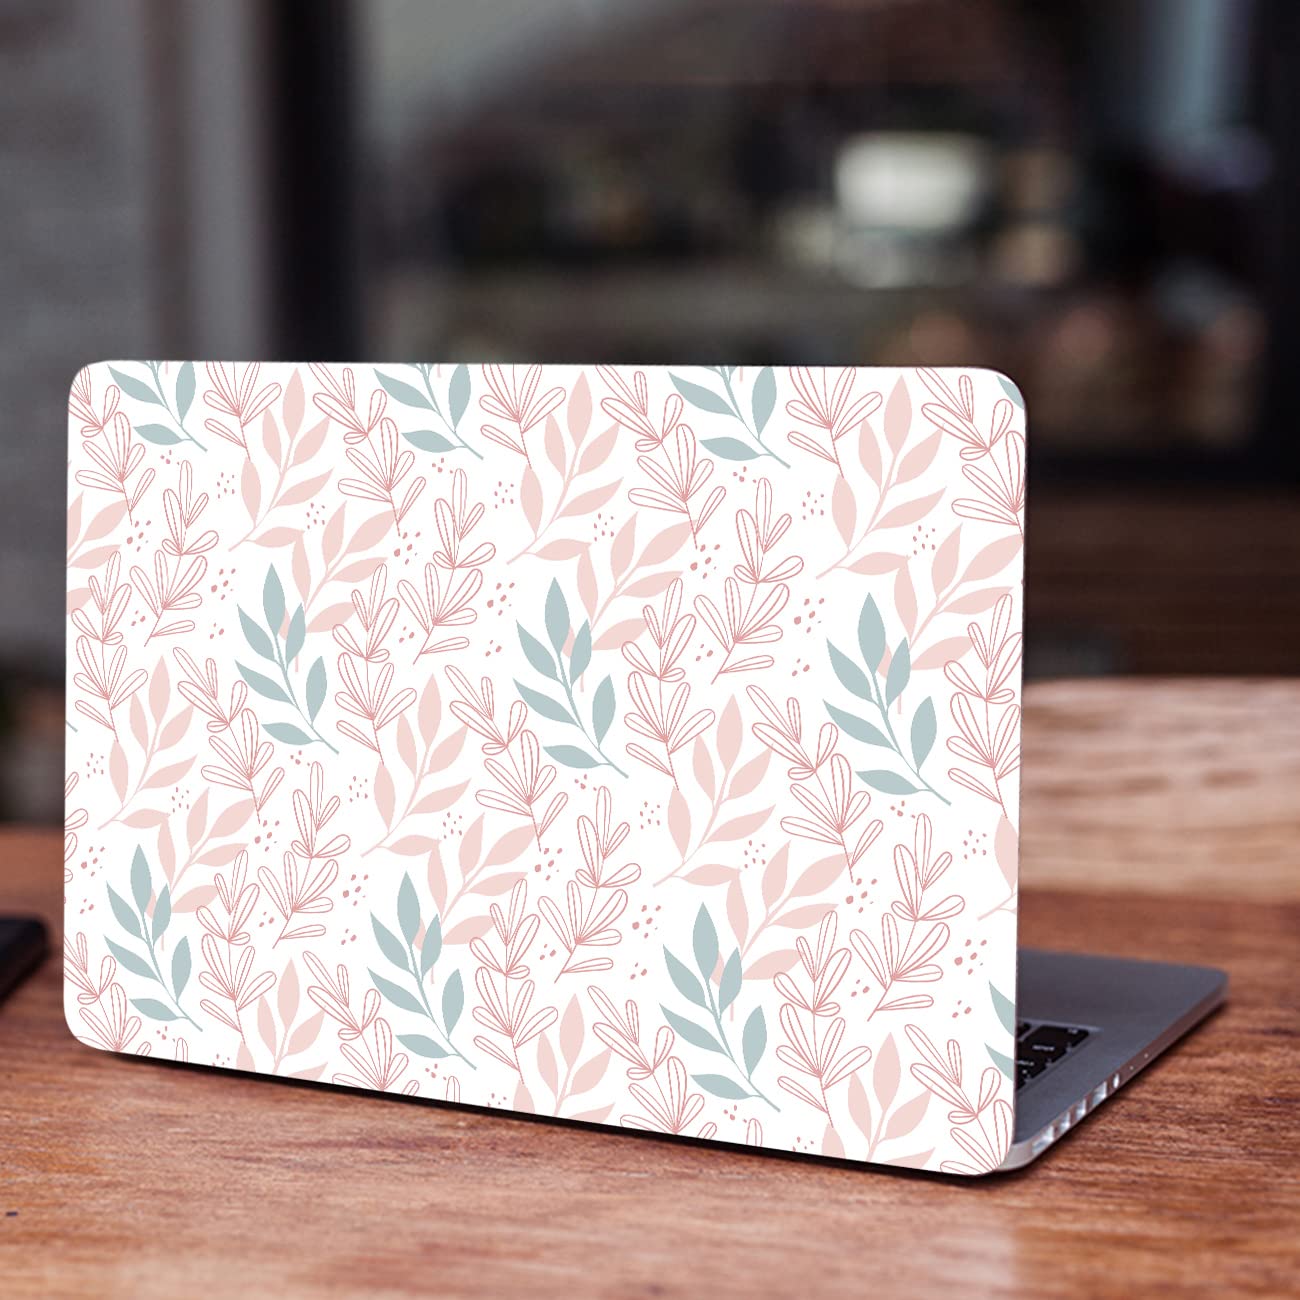 Kotart Vinyl Laptop Decals for All Laptops Upto 15.6 inch - Self Adhesive Nature Inspired Printed Laptop Skins / Stickers for HP Apple Acer Asus Dell LG and All Laptops-Kotart